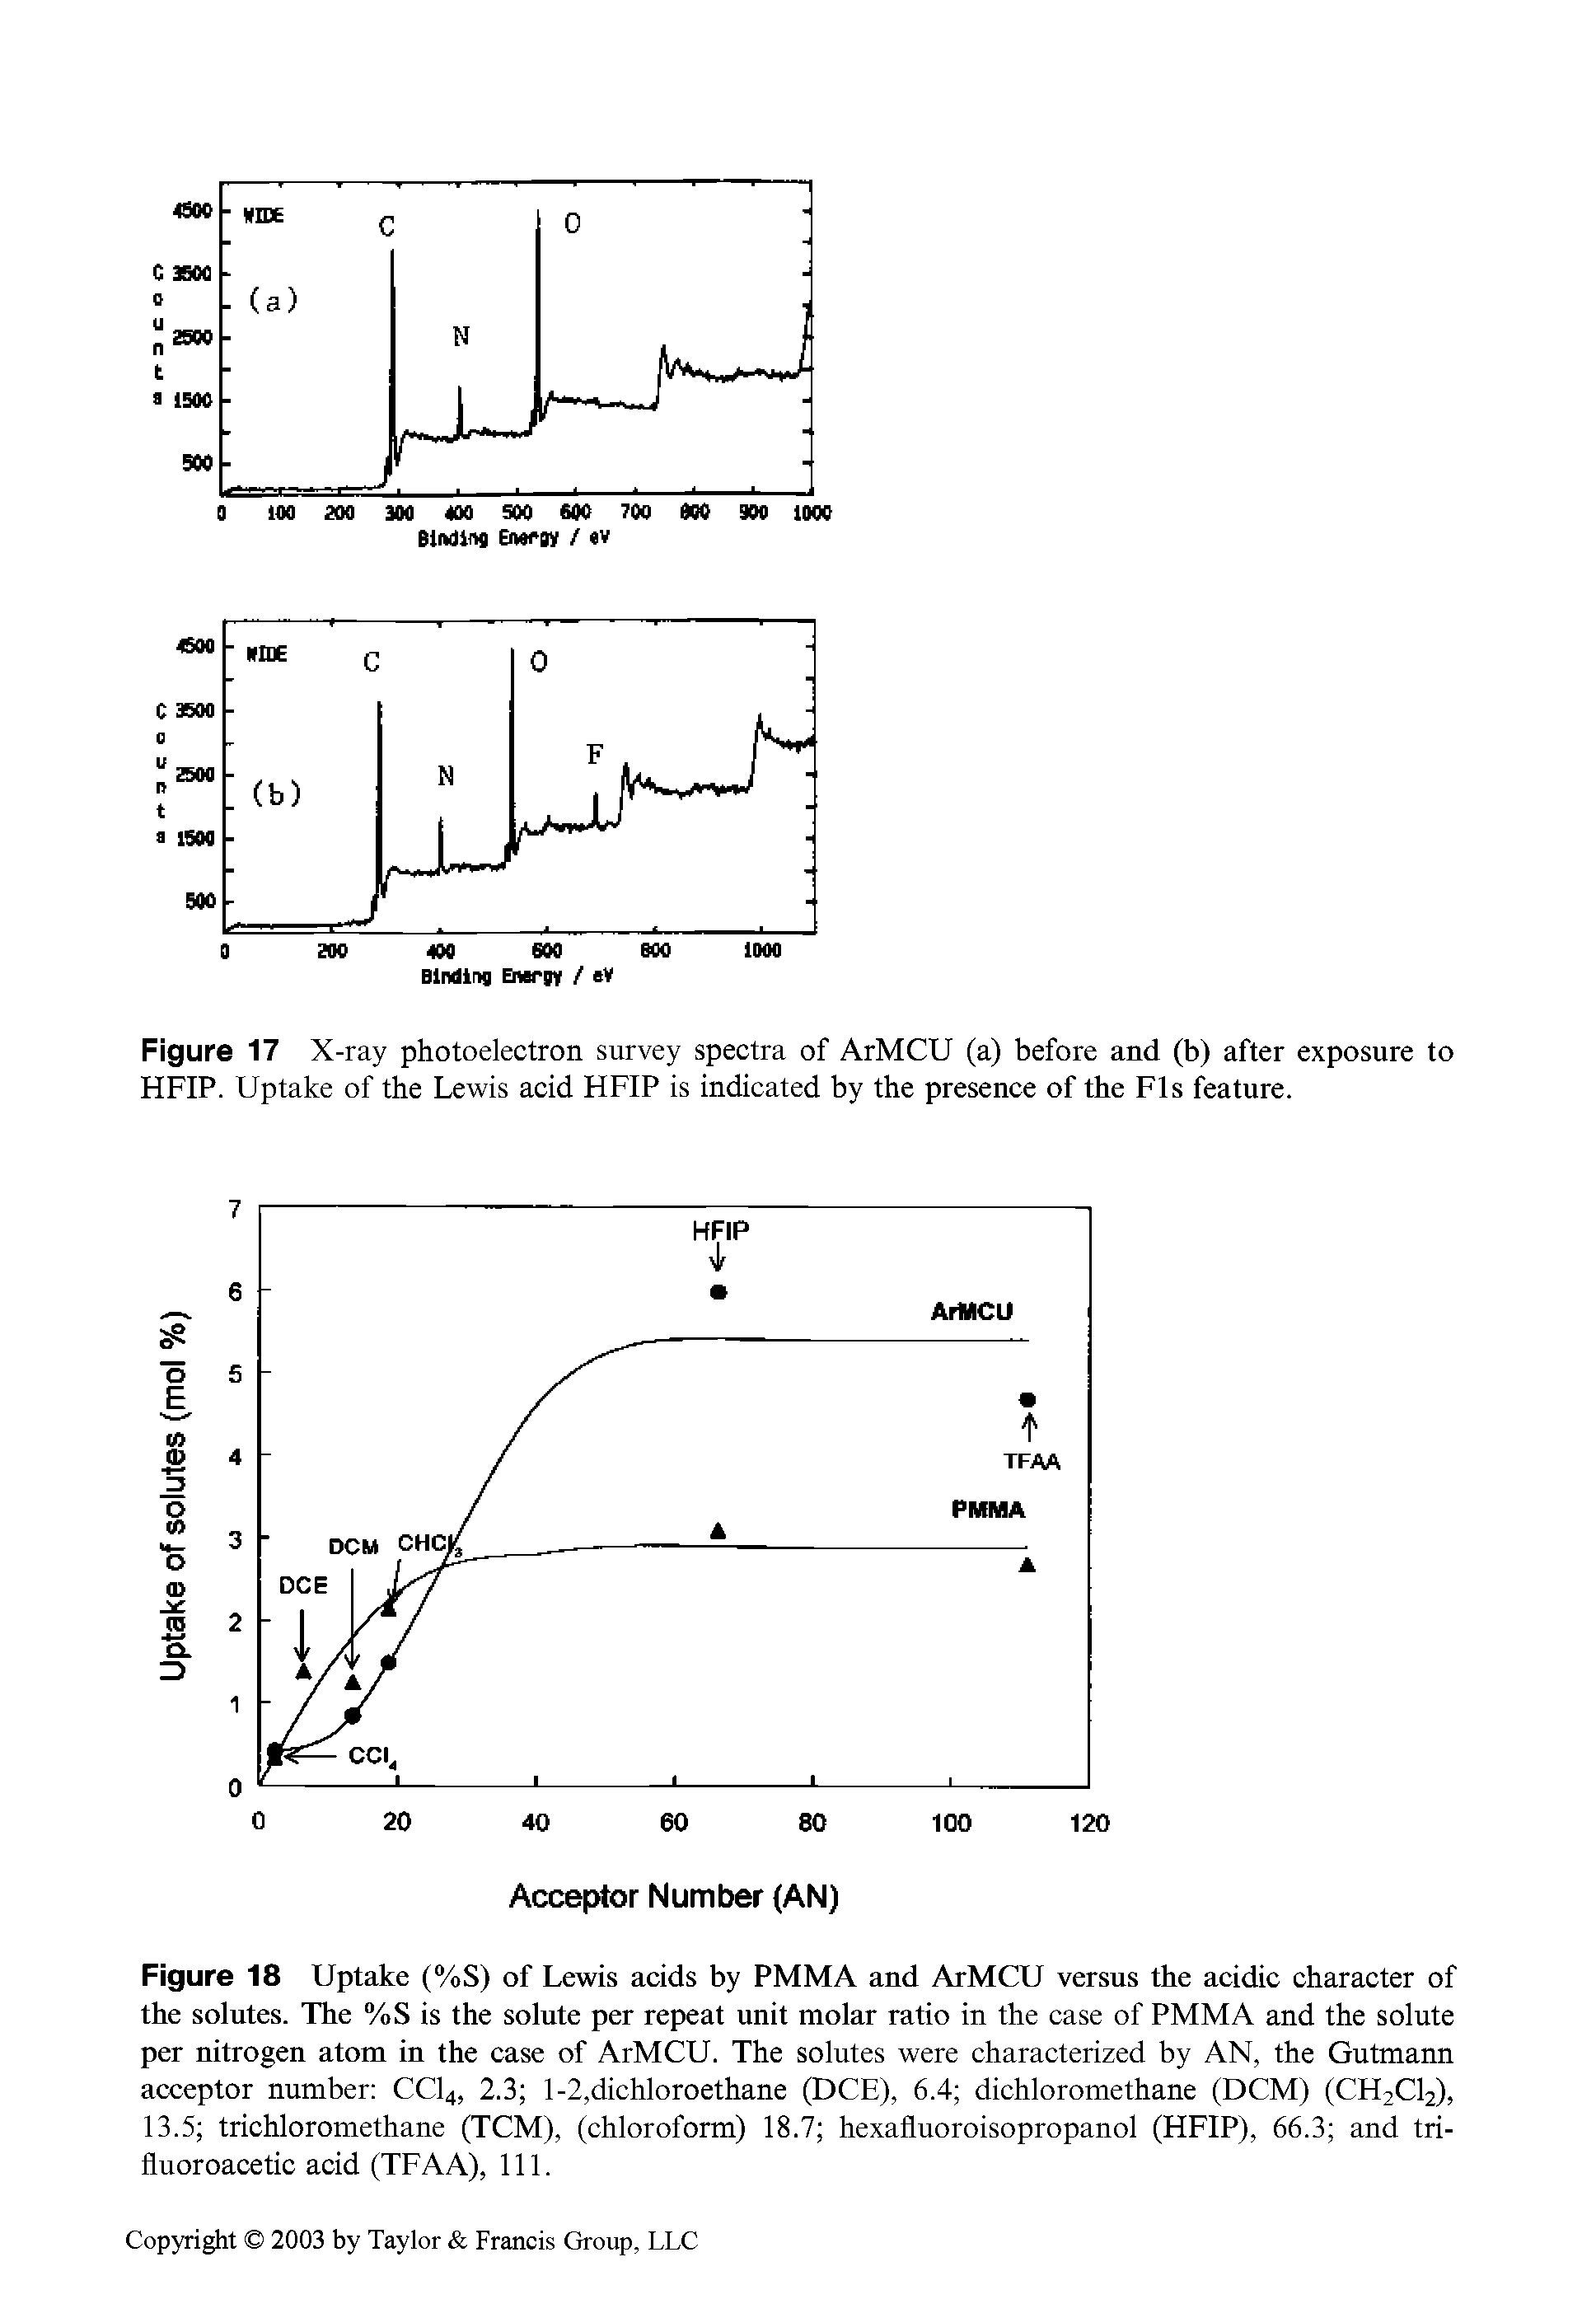 Figure 18 Uptake ( /oS) of Lewis acids by PMMA and ArMCU versus the acidic character of the solutes. The %S is the solute per repeat unit molar ratio in the case of PMMA and the solute per nitrogen atom in the case of ArMCU. The solutes were characterized by AN, the Gutmann acceptor number CCI4, 2.3 l-2,dichloroethane (DCE), 6.4 dichloromethane (DCM) (CH2CI2), 13.5 trichloromethane (TCM), (chloroform) 18.7 hexafluoroisopropanol (HFIP), 66.3 and tri-fluoroacetic acid (TFAA), 111.